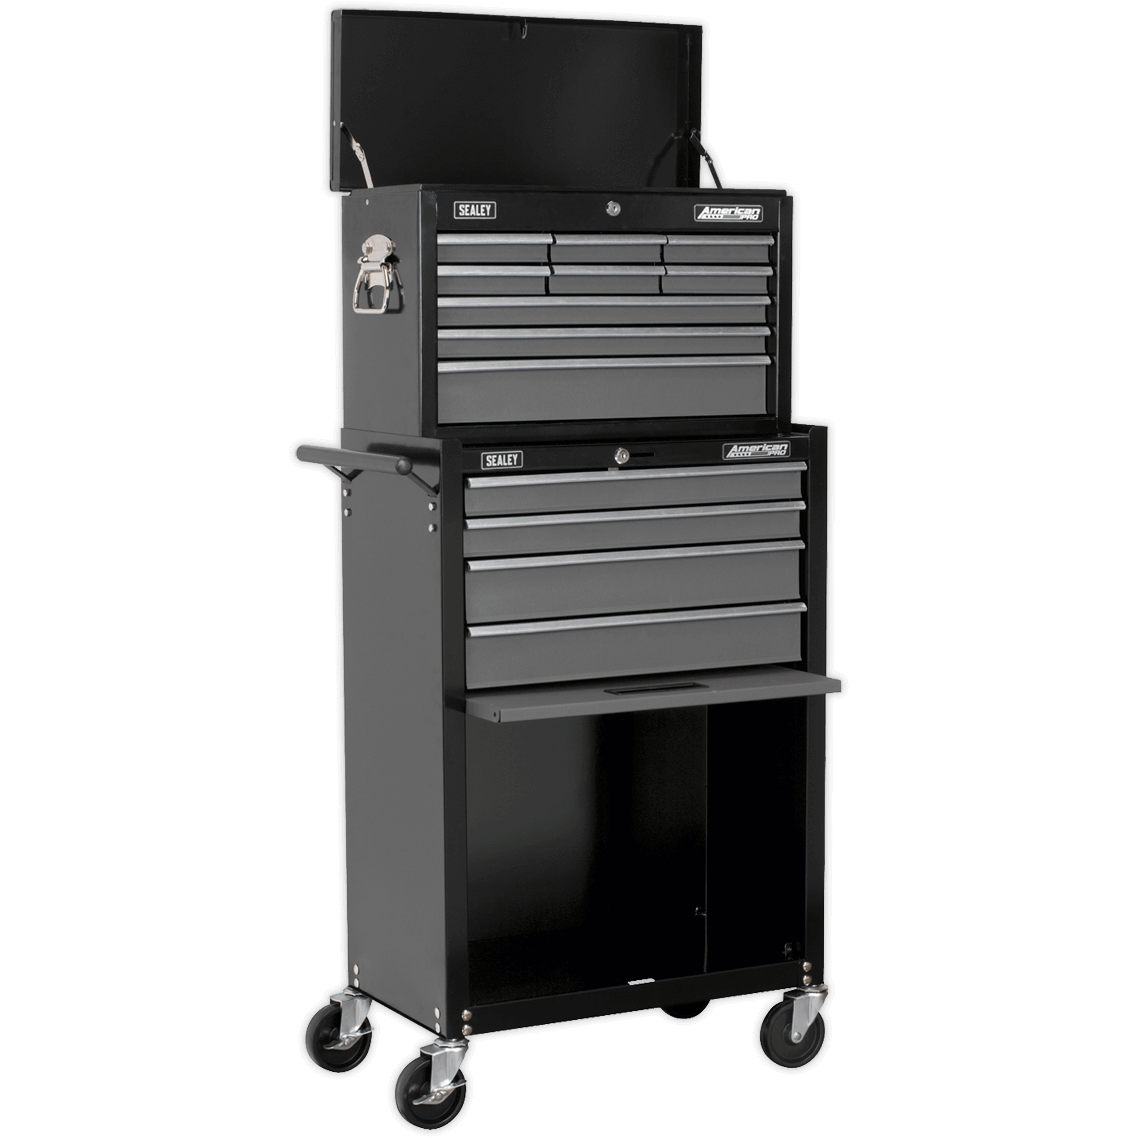 Sealey American Pro 13 Drawer Roller Cabinet and Tool Chest Black / Grey